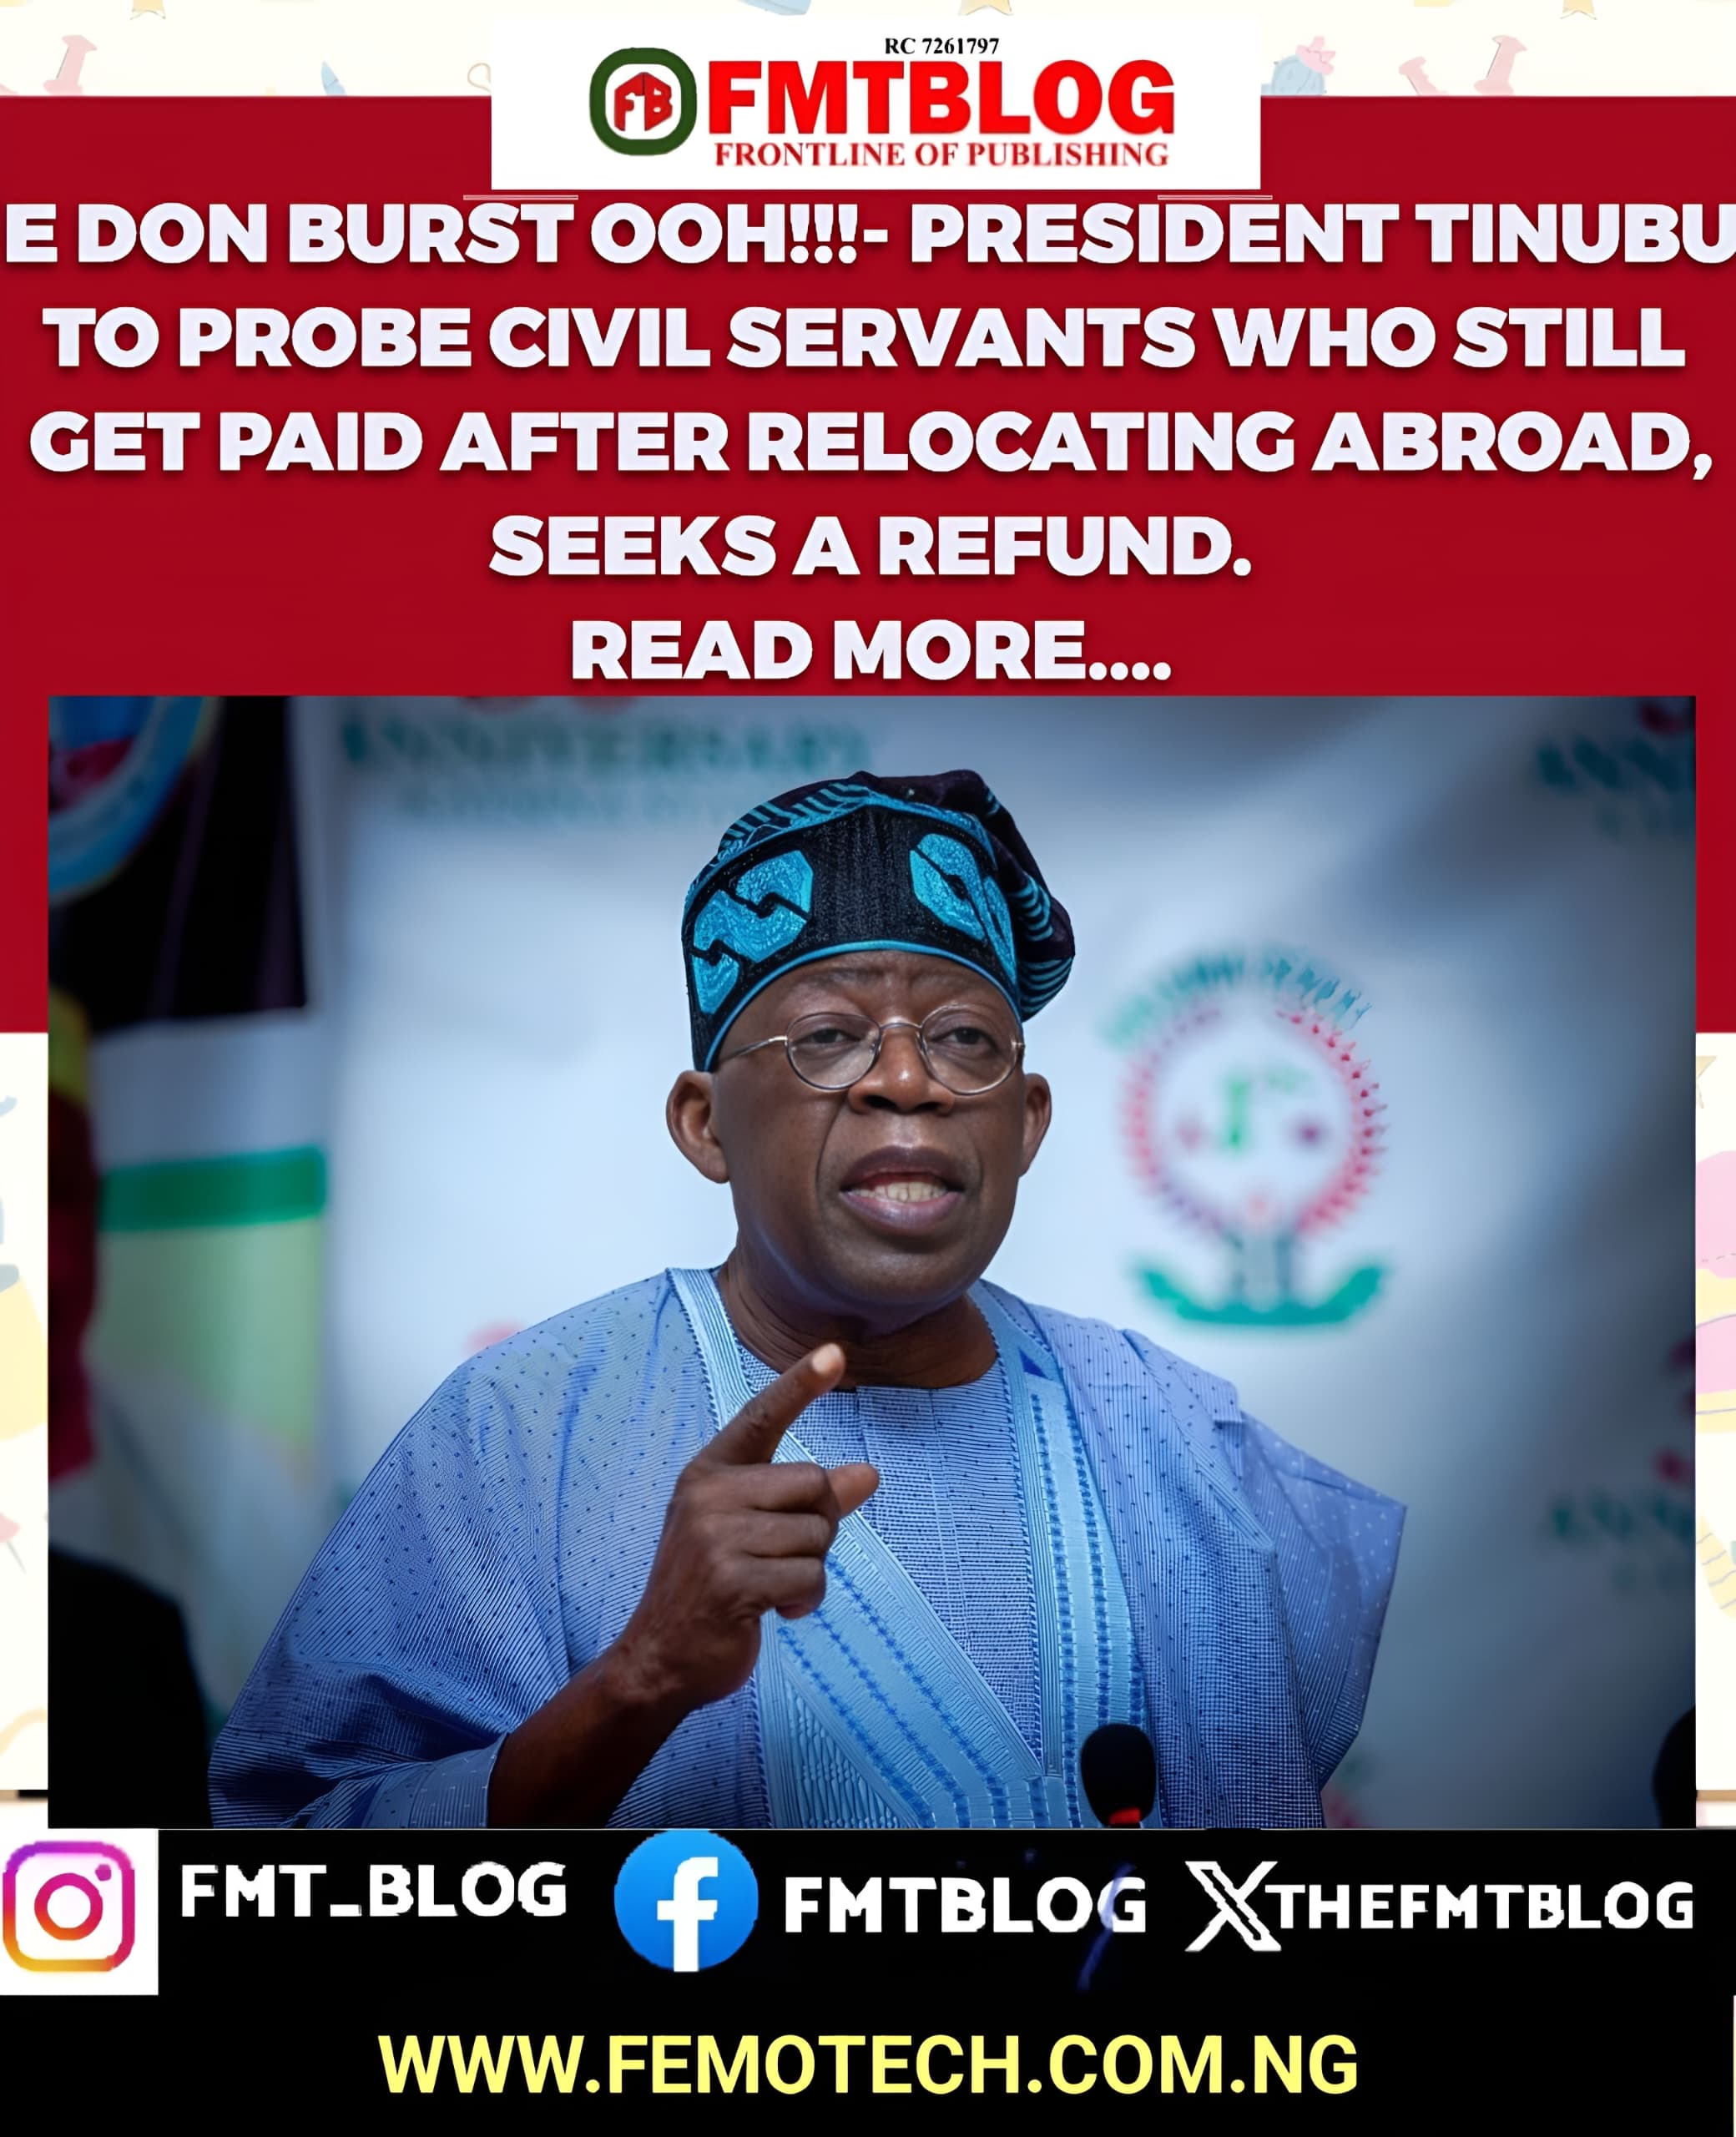 E Don Burst Oh!!!- President Tinubu To Probe Civil Servants Who Still Get Paid After Relocating Abroad, Seeks A Refund